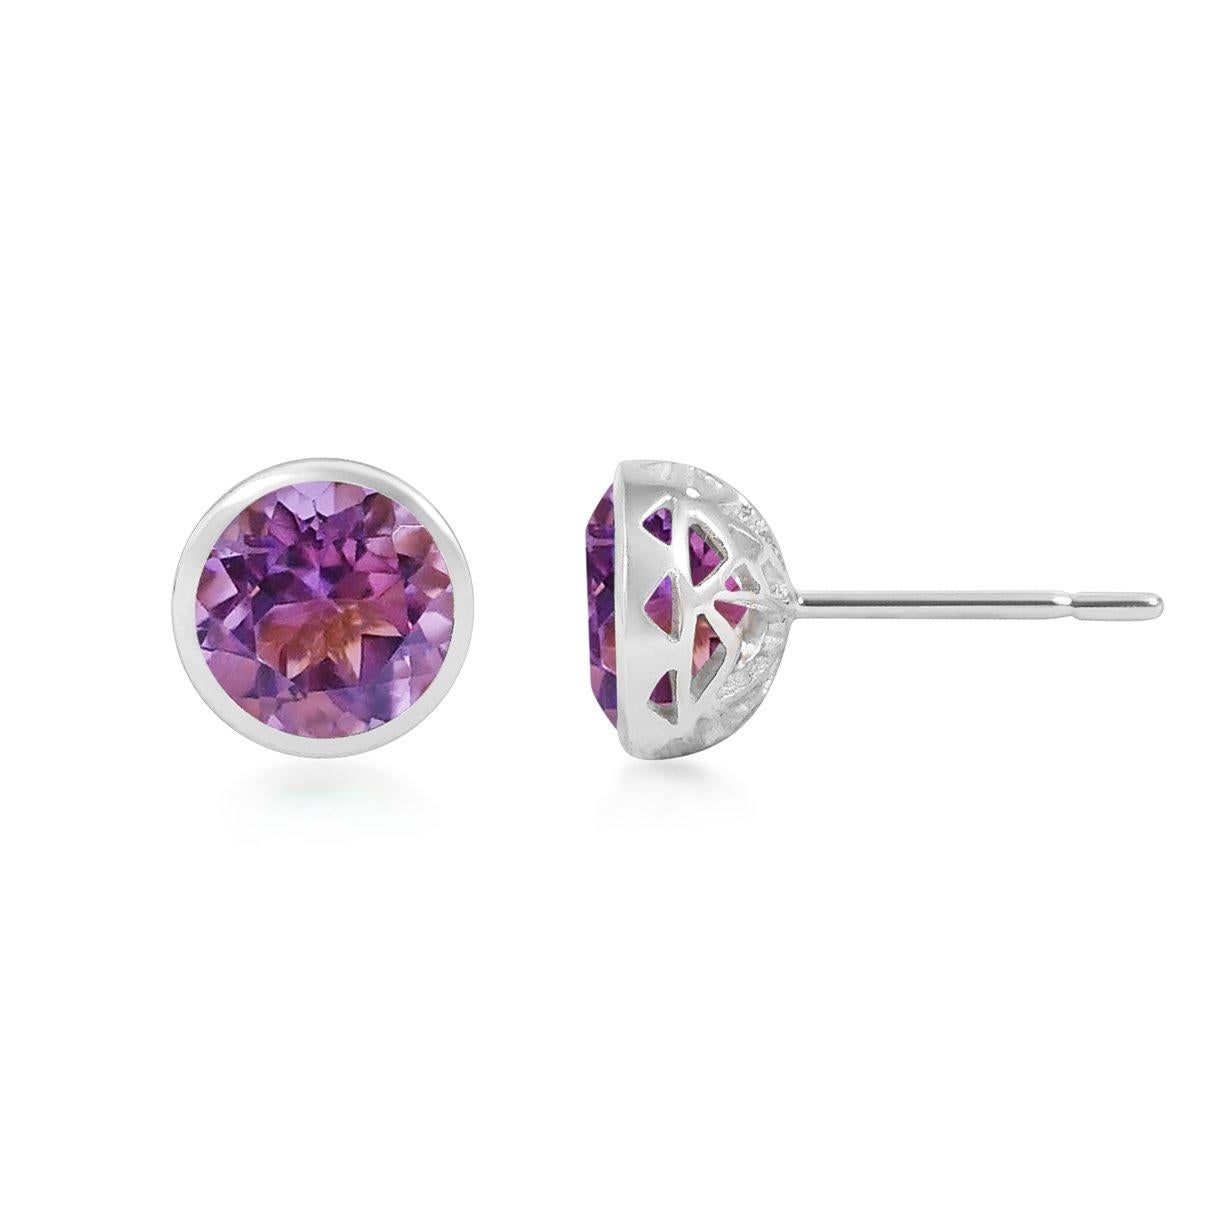 Handcrafted 2.40 Carats Amethyst 18 Karat White Gold Stud Earrings. The 8mm natural stones are set in our iconic hand pierced gold lace to let the light through our precious and fine stones our earrings are the perfect everyday wear.

Once